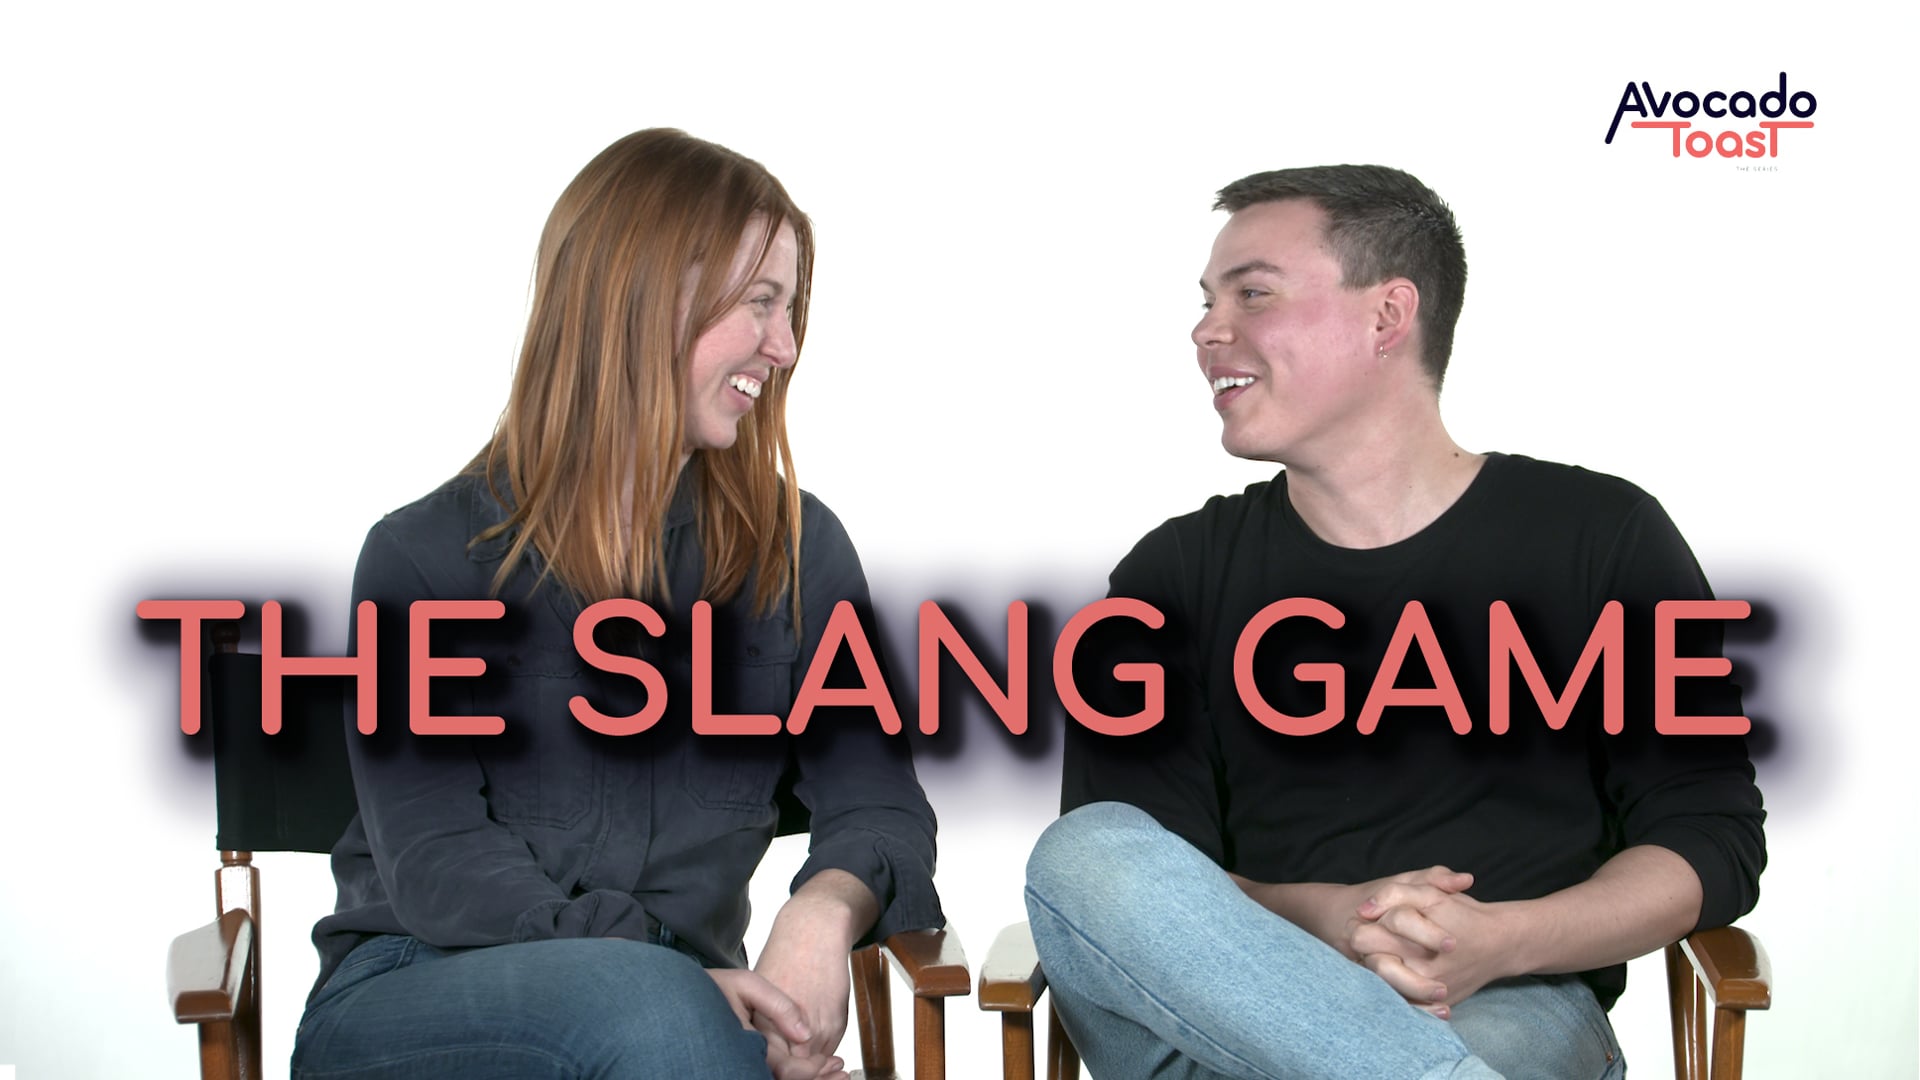 Perrie Voss and Wayne Burns from Avocado Toast play the Slang Game